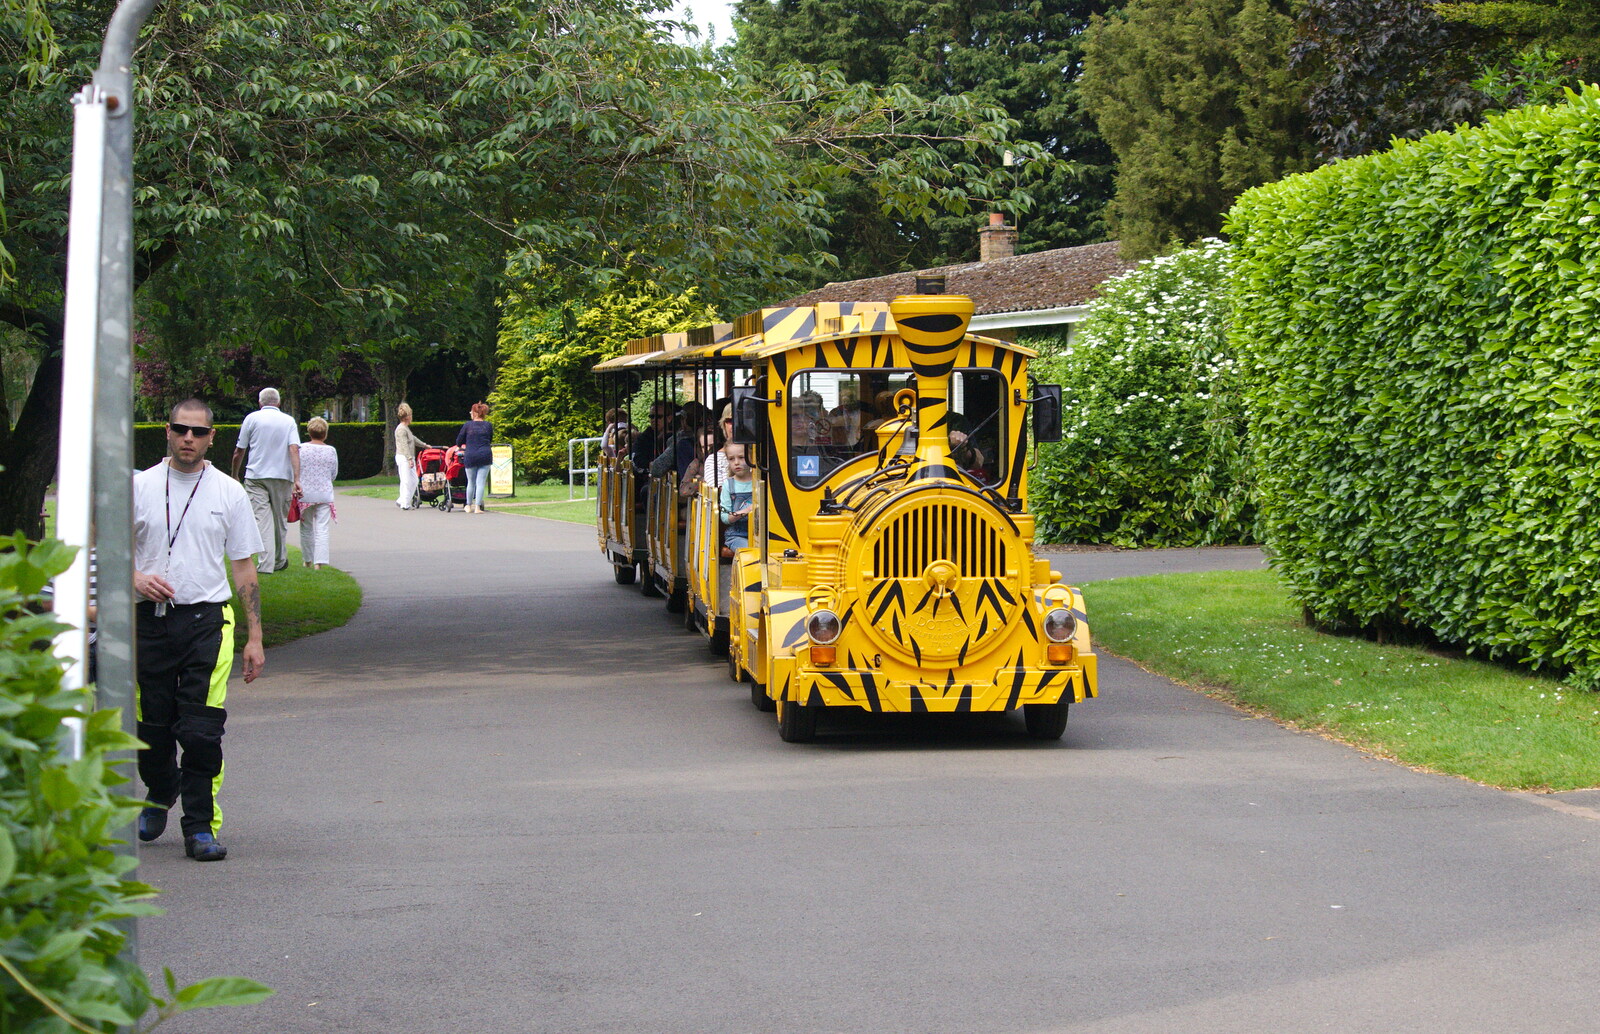 A Birthday Trip to the Zoo, Banham, Norfolk - 26th May 2014: The land train does a tour around